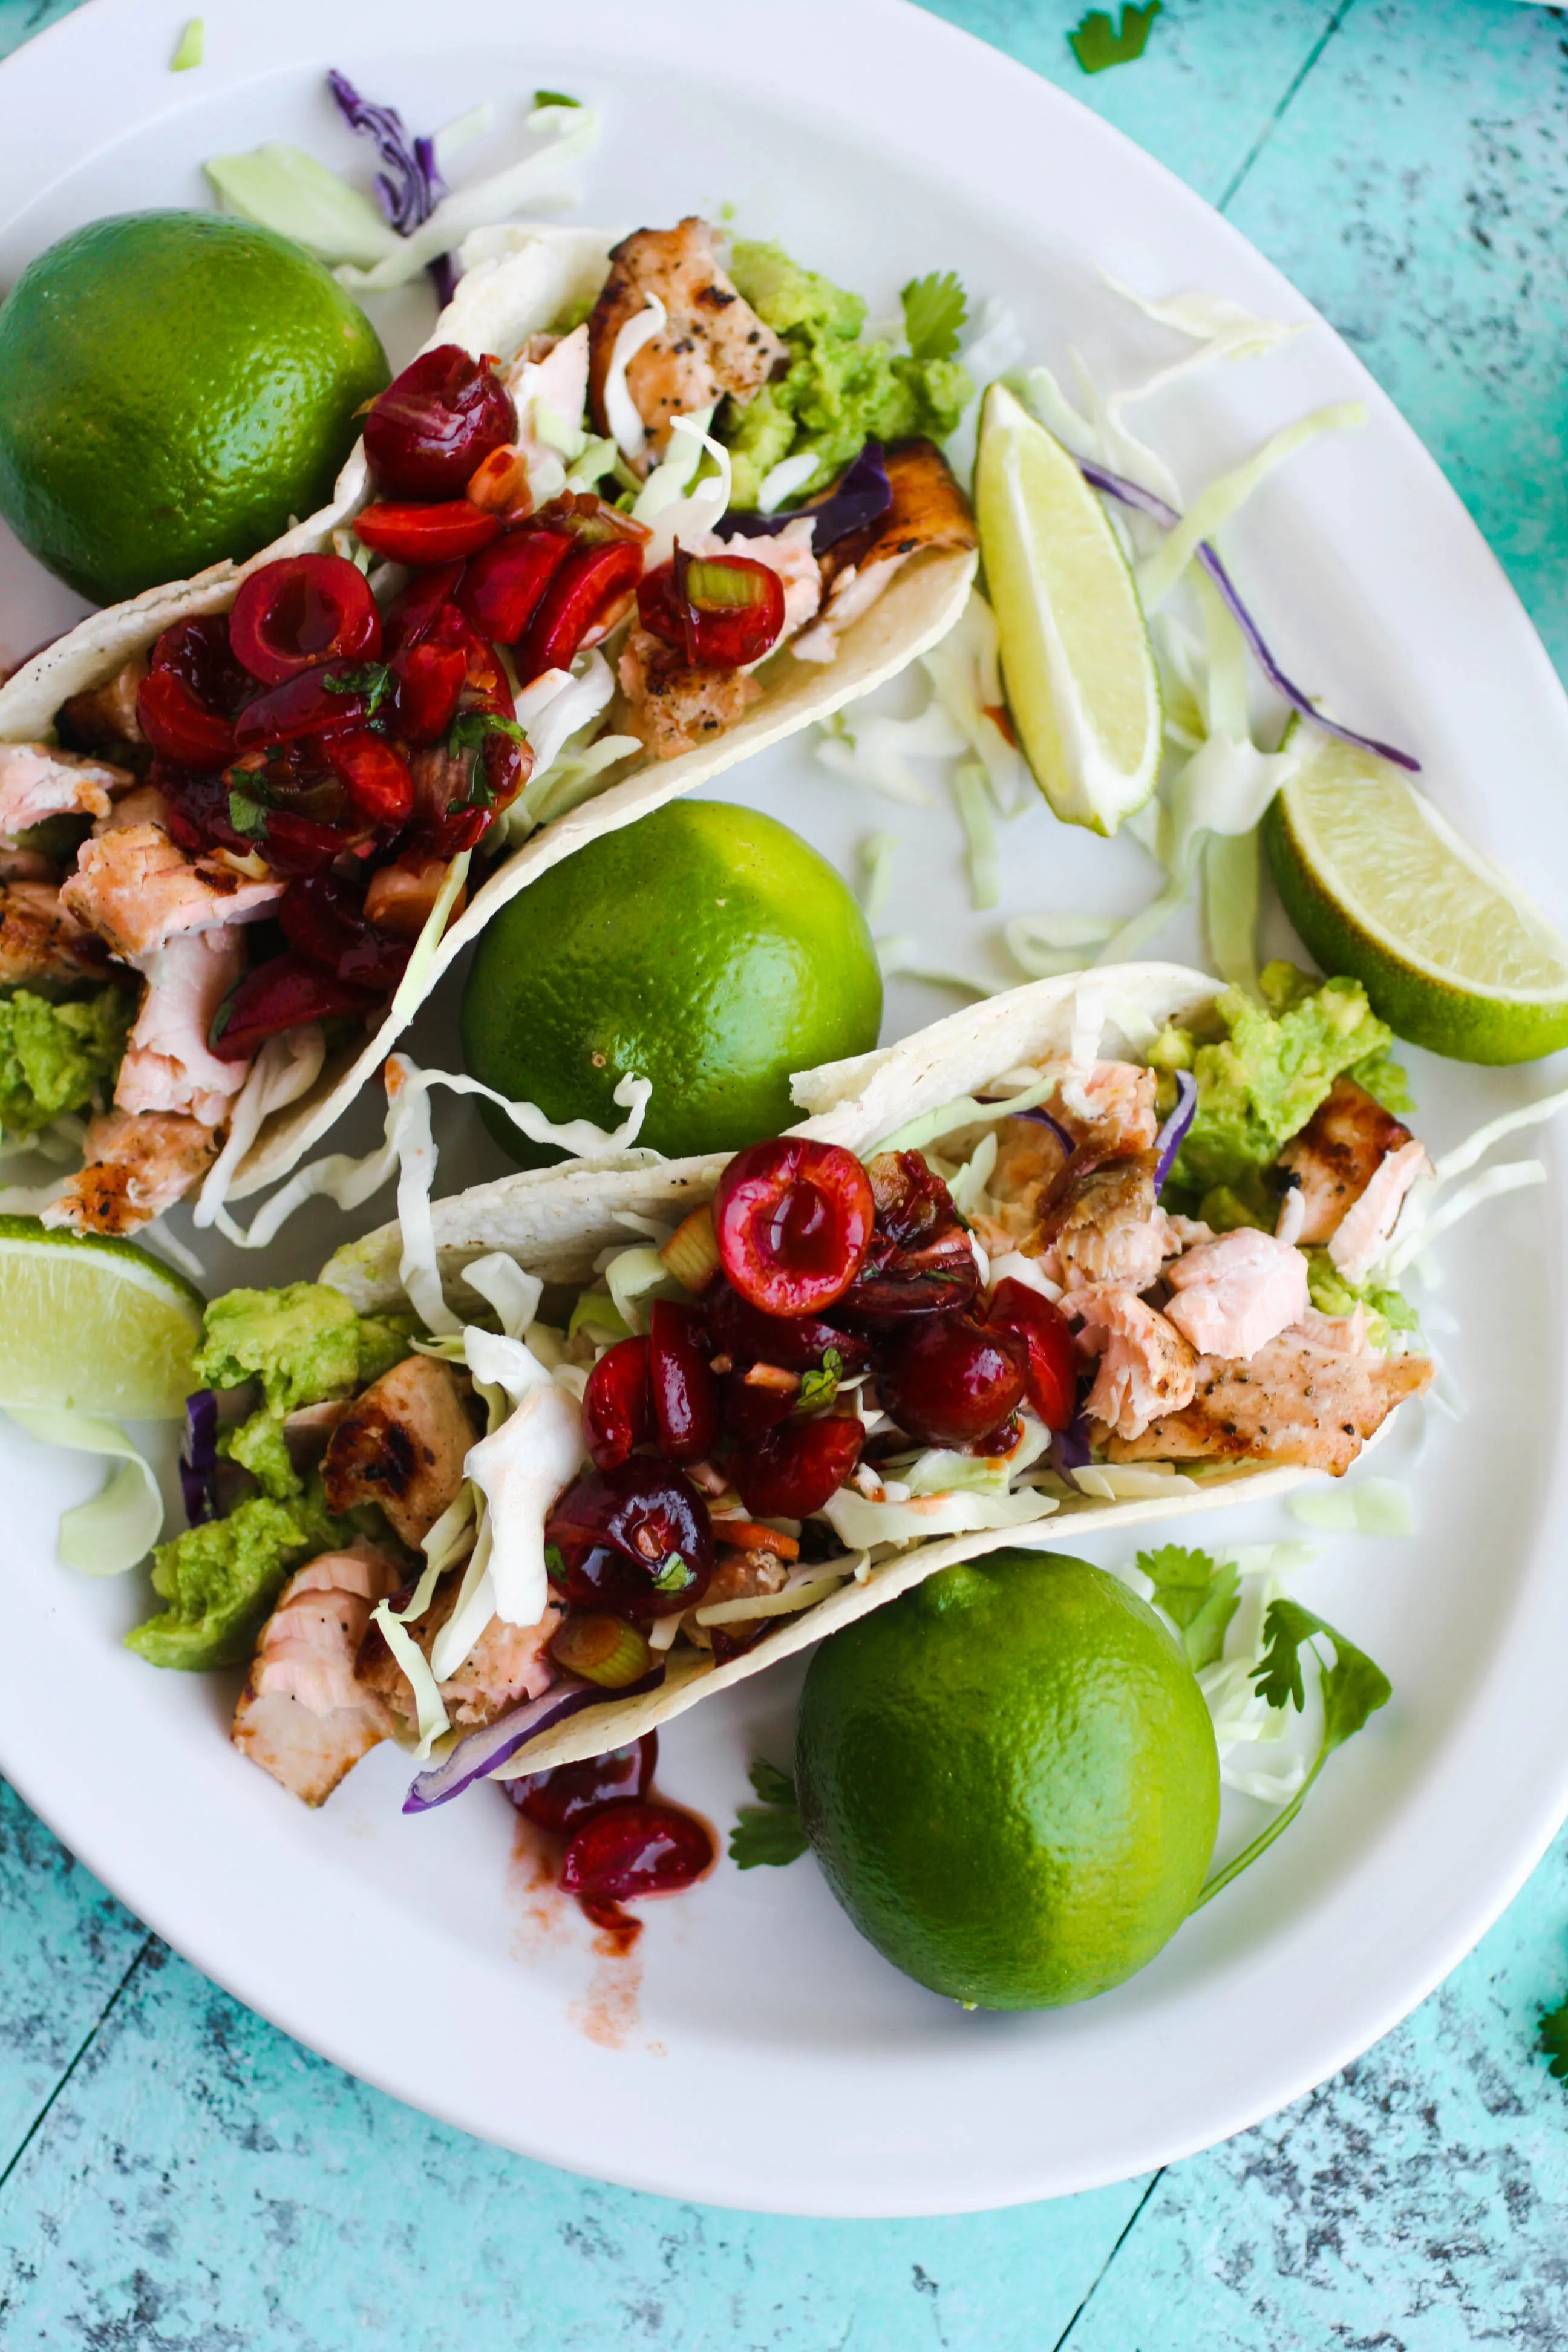 Grilled Salmon Tacos with Cherry-Chipotle Salsa is an amazing summer dish. You'll love everything from the salmon down to the fresh salsa!